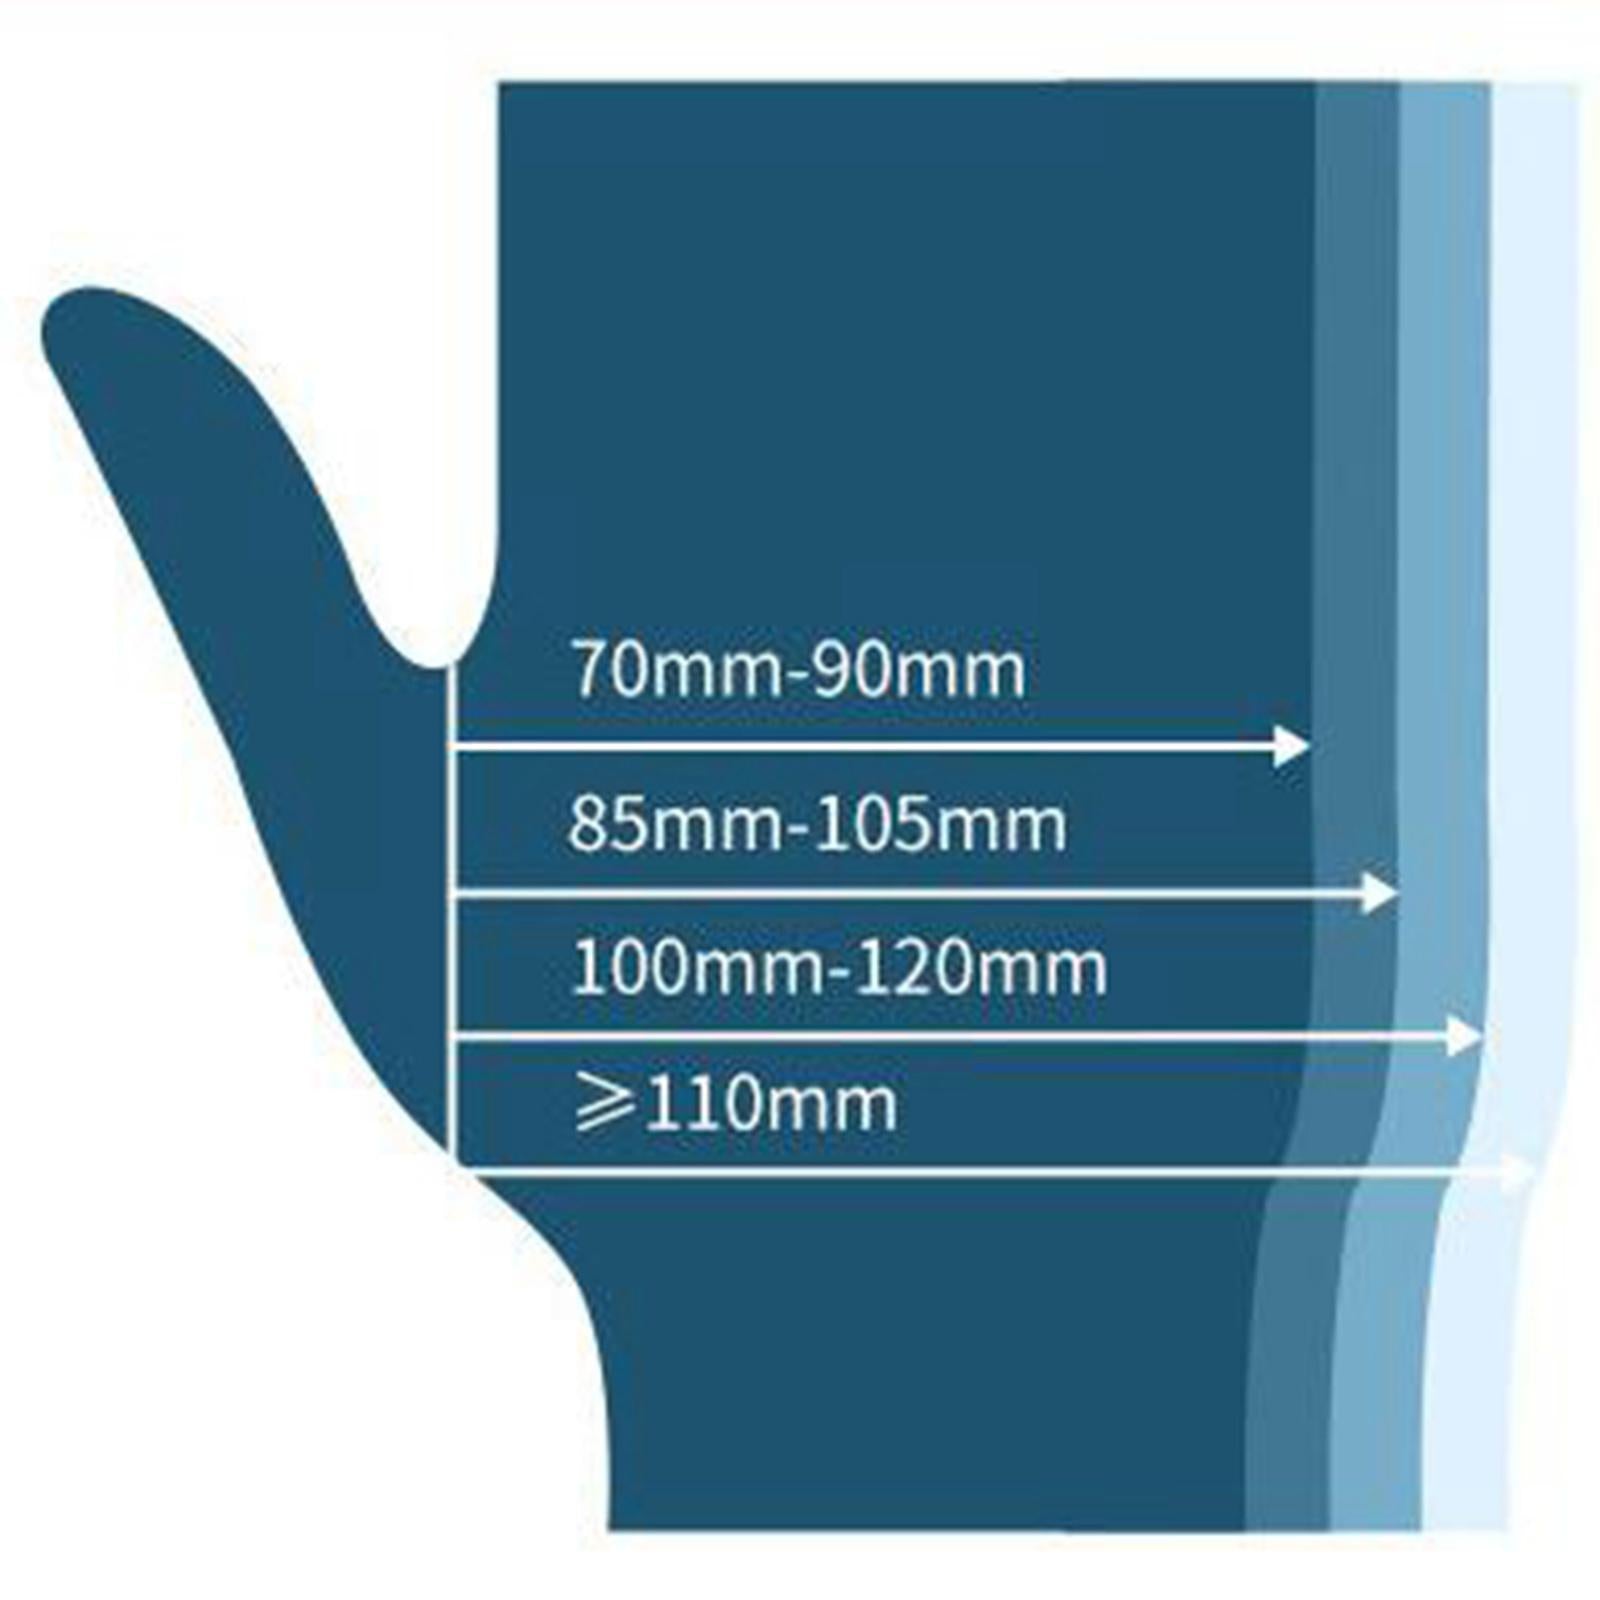 10Pcs Strong Nitrile Gloves Powder Free Pet Care Protective Gloves Blue L